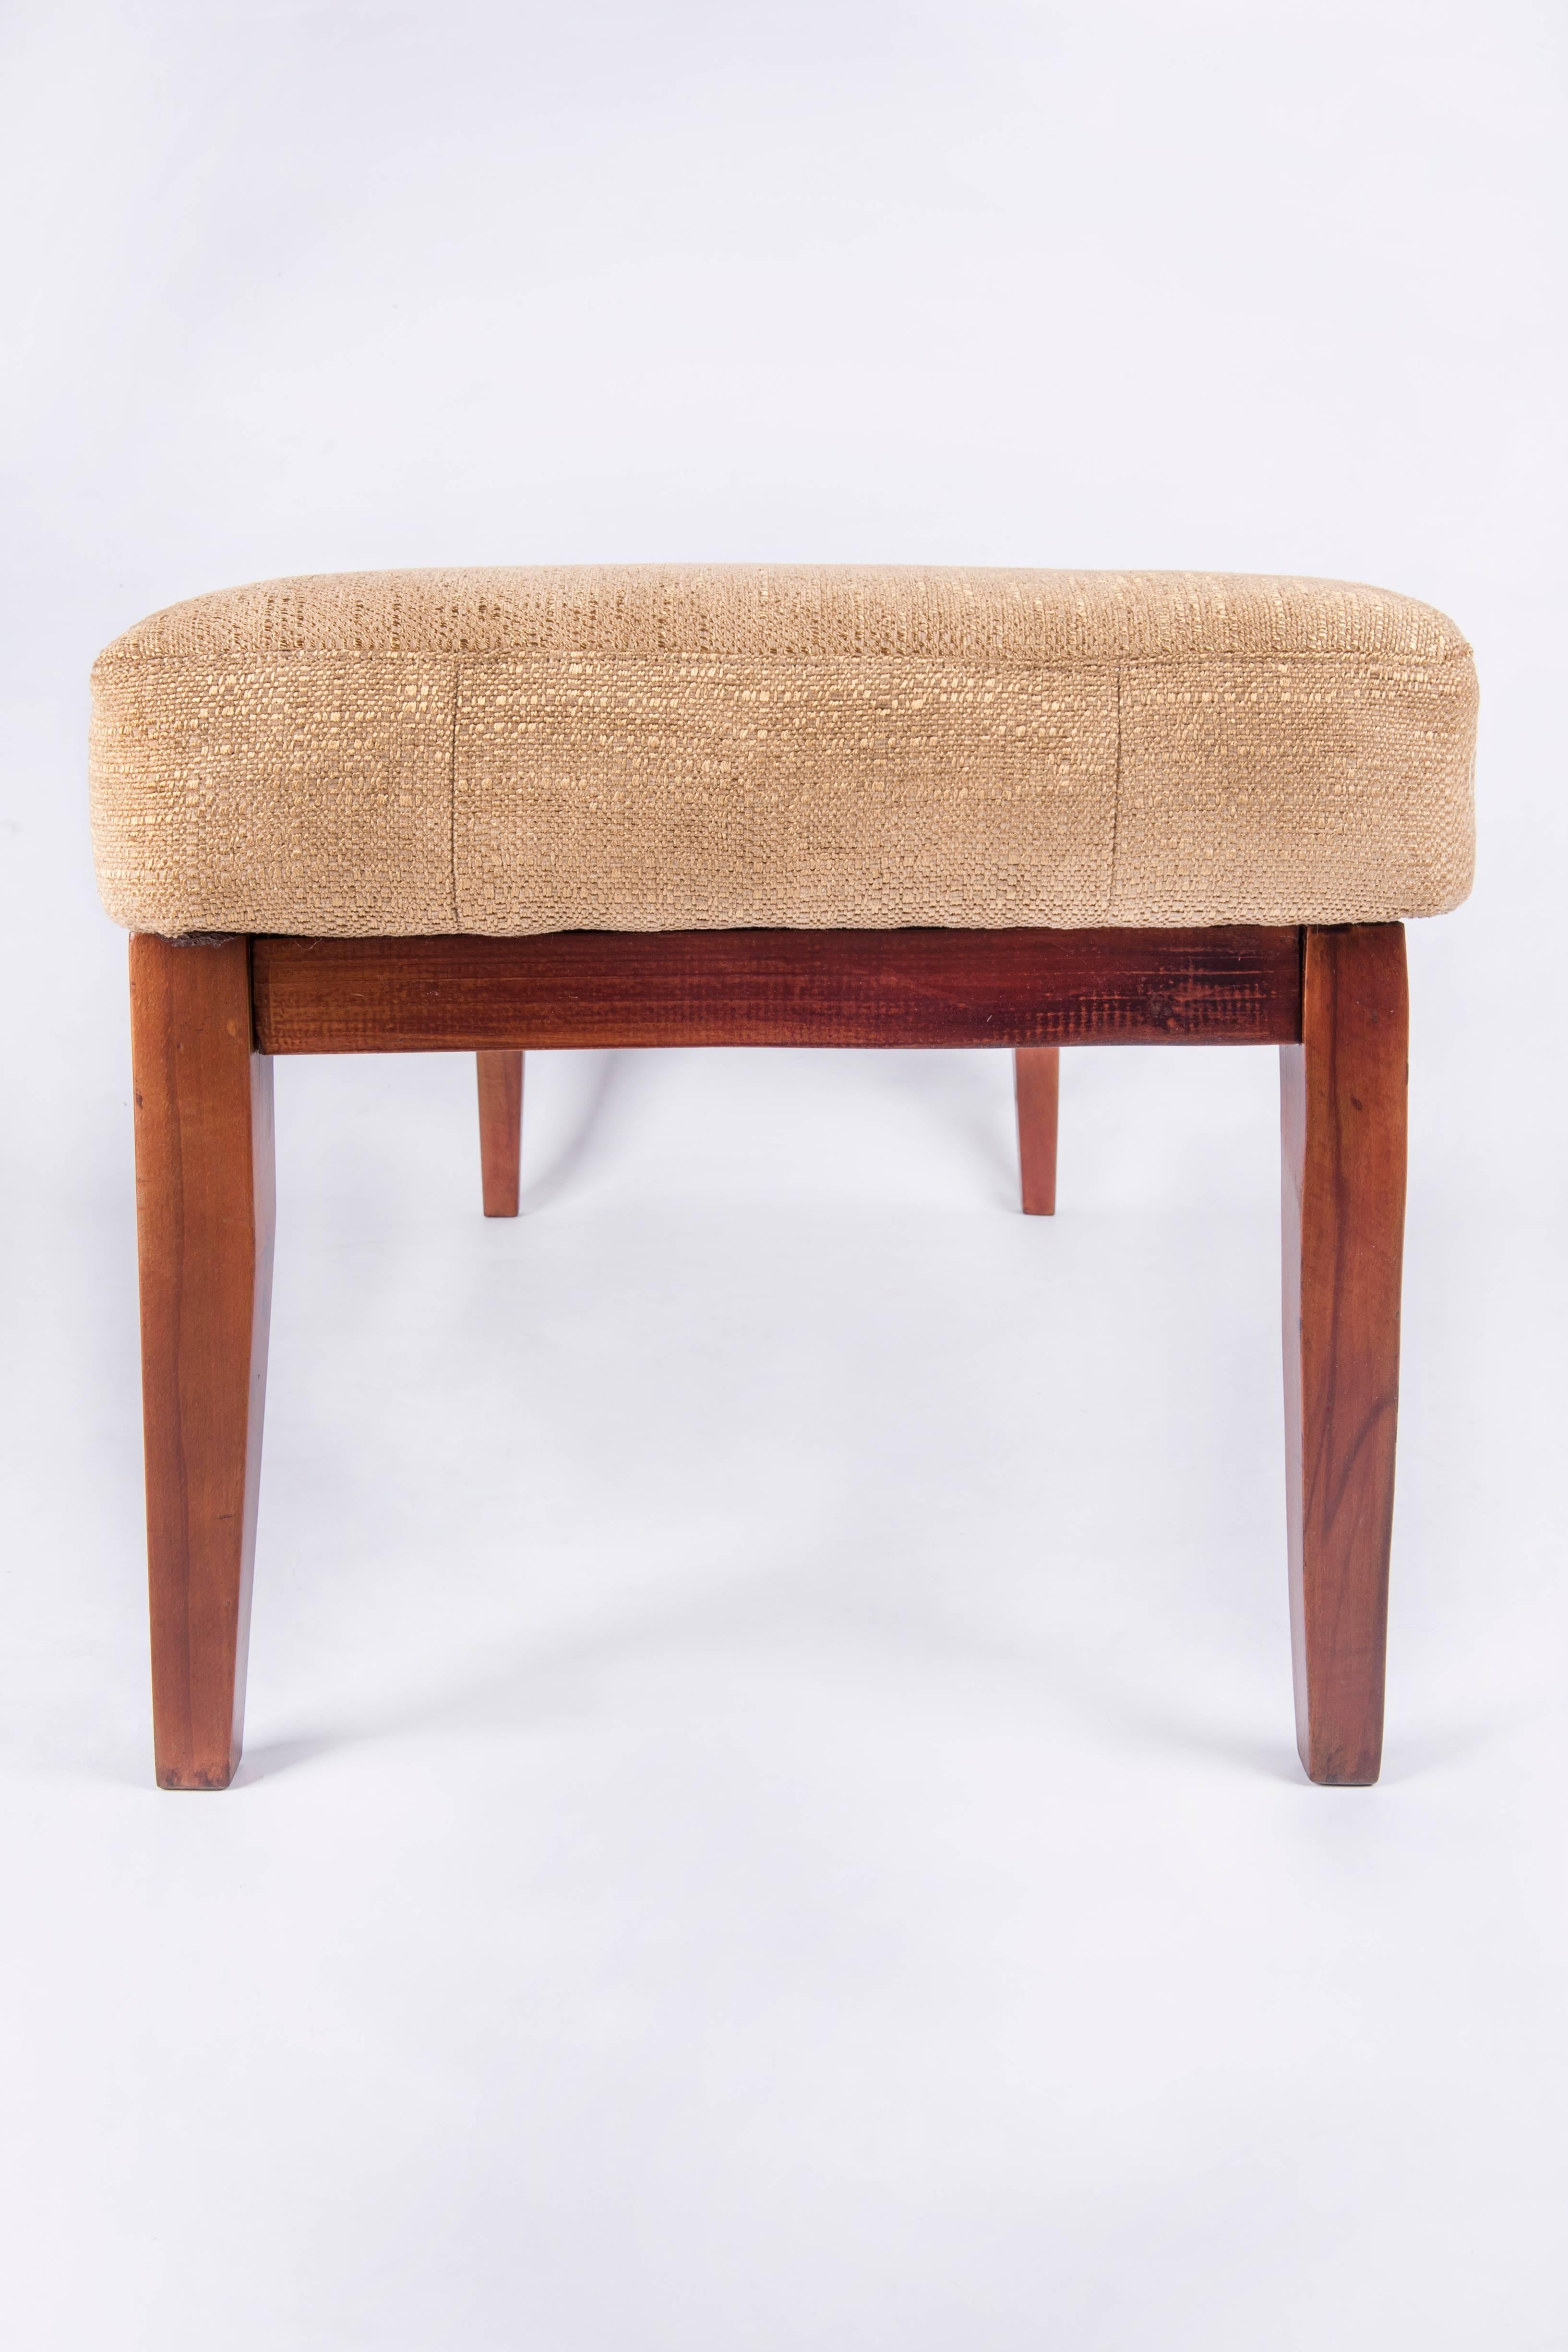 A very elegant 1960s solid beech wood bench. The piece was completely restored, refurbished .The wooden frame was repolished and it's reupholstered with a golden colored fabric (cotton and silk).